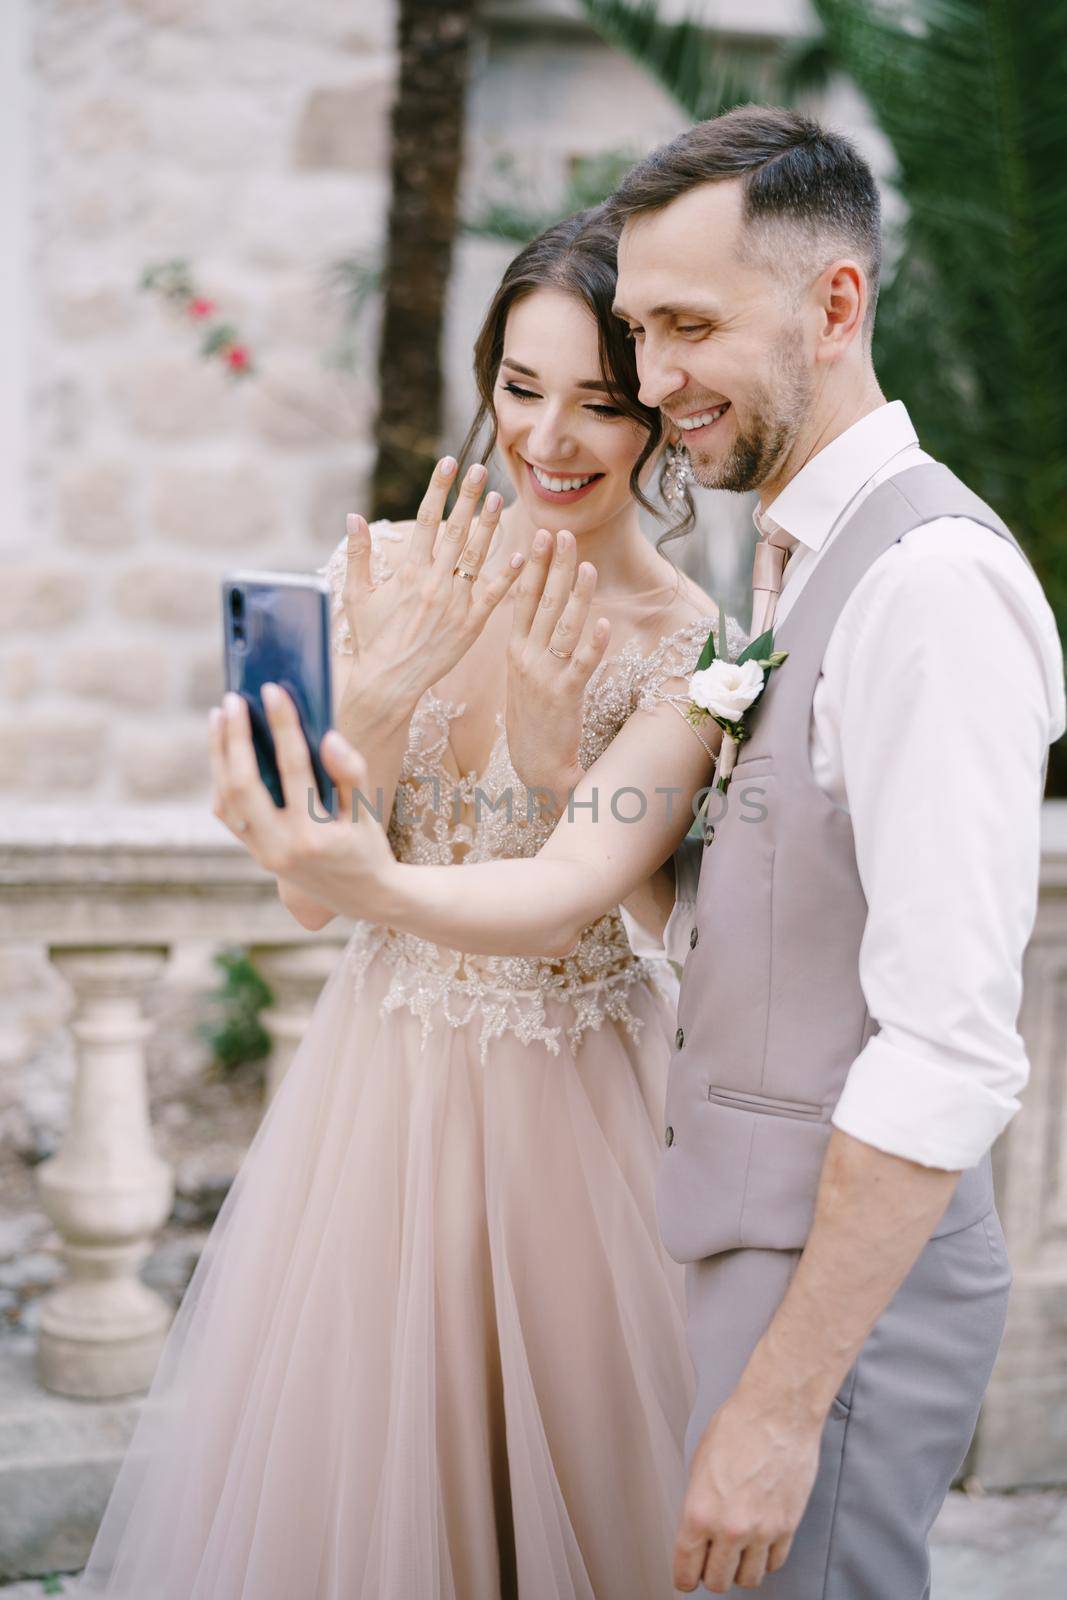 Bride and groom take a selfie with rings on their fingers on a smartphone. High quality photo